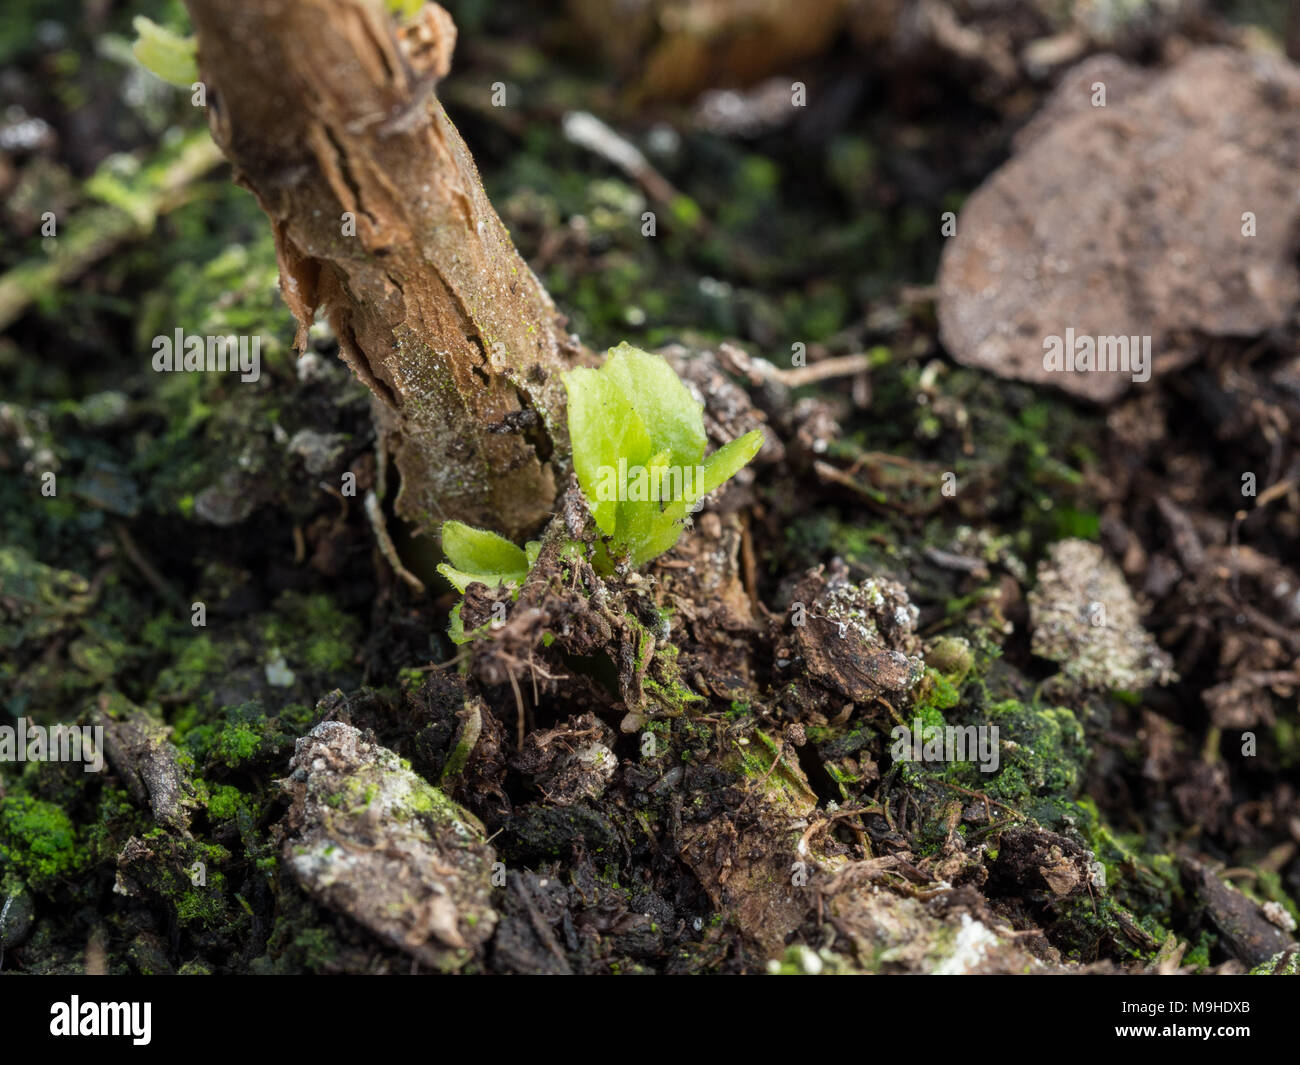 Close up of a new shoot bursting from the old growth of a fuchsia stem Stock Photo